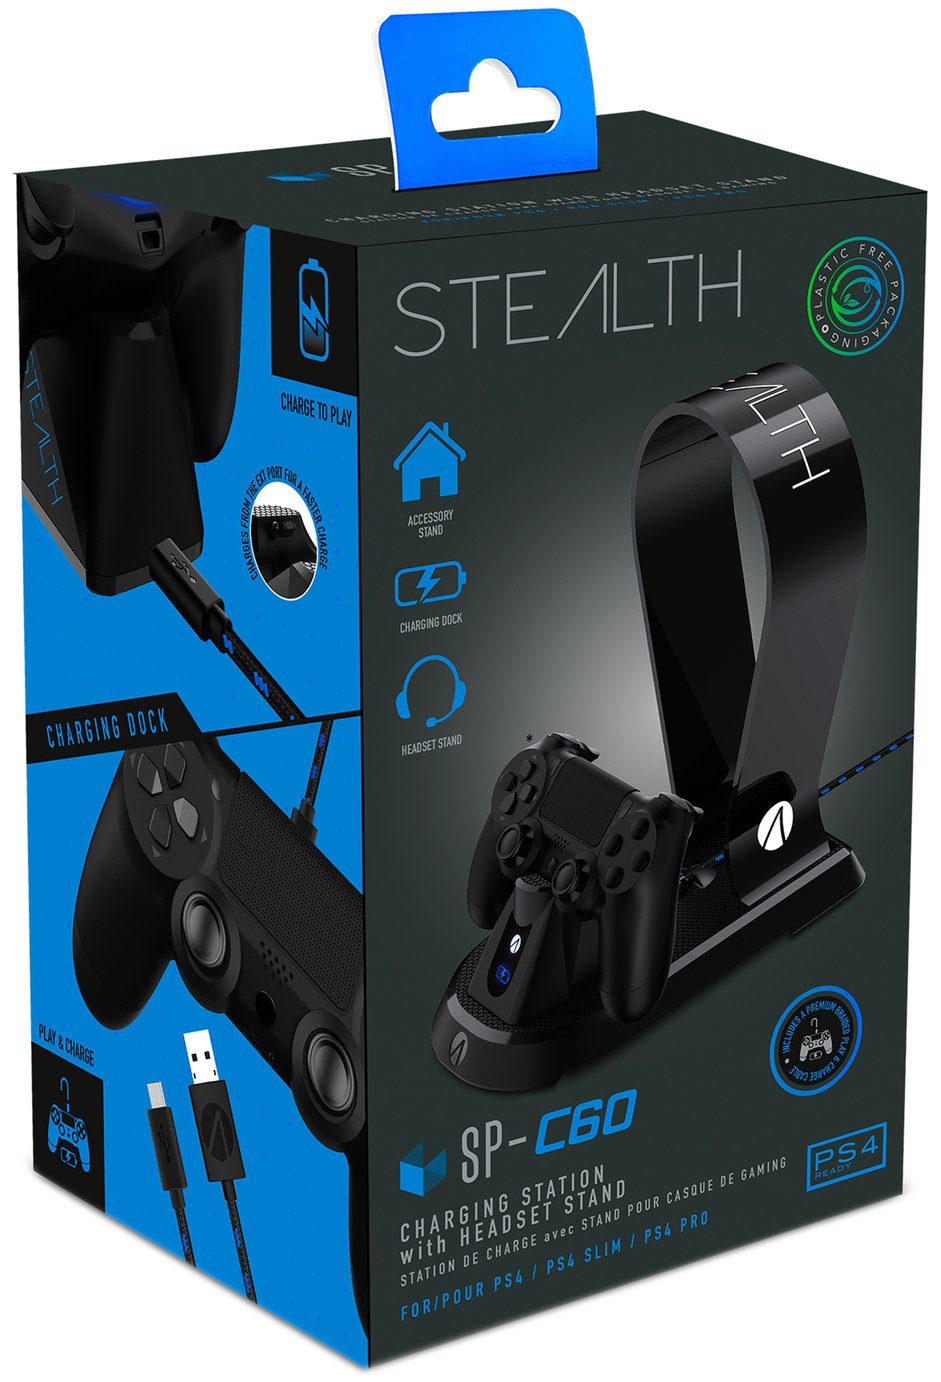 Stealth PS4 Dock & Charging Station with Headset Stand Review